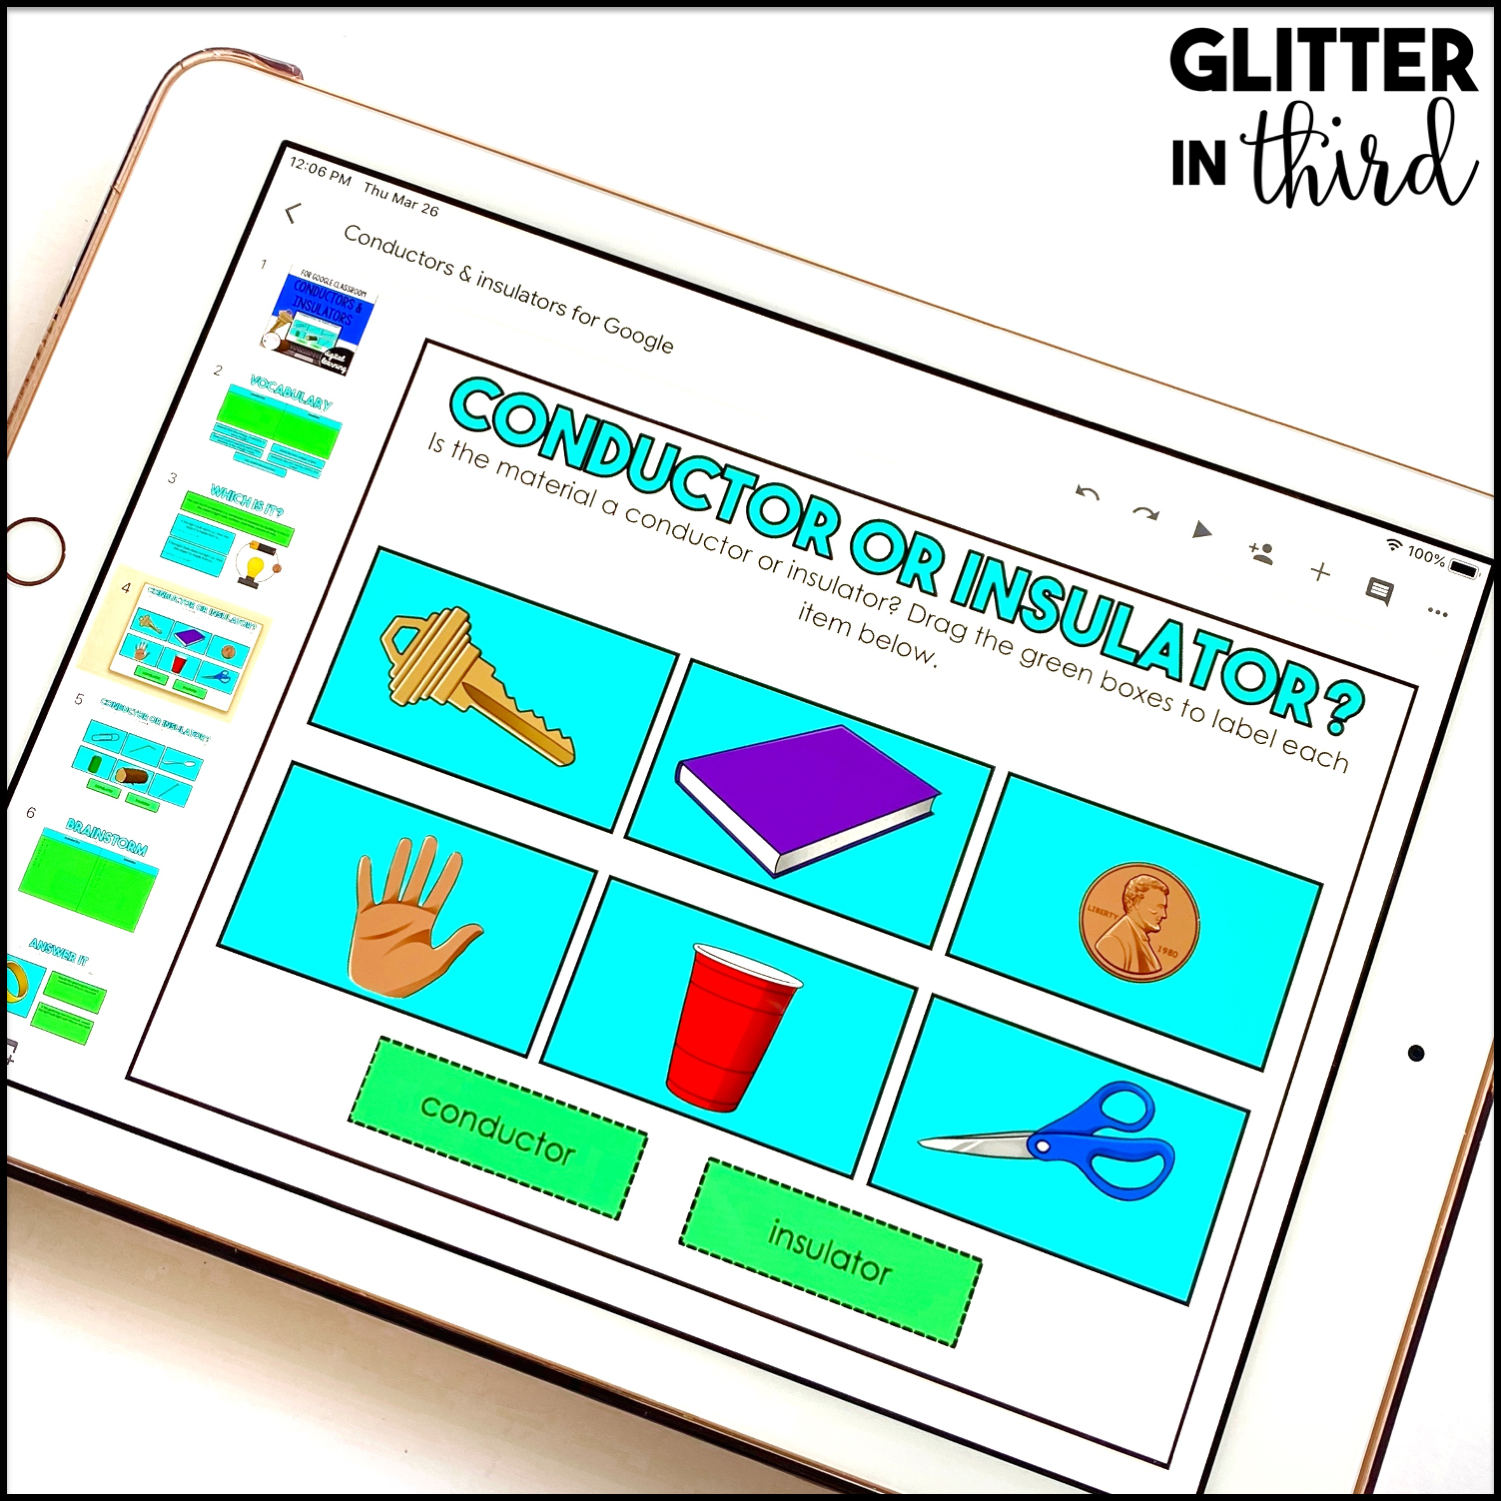 Teaching Engineering with Electricity Activities - Glitter in Third